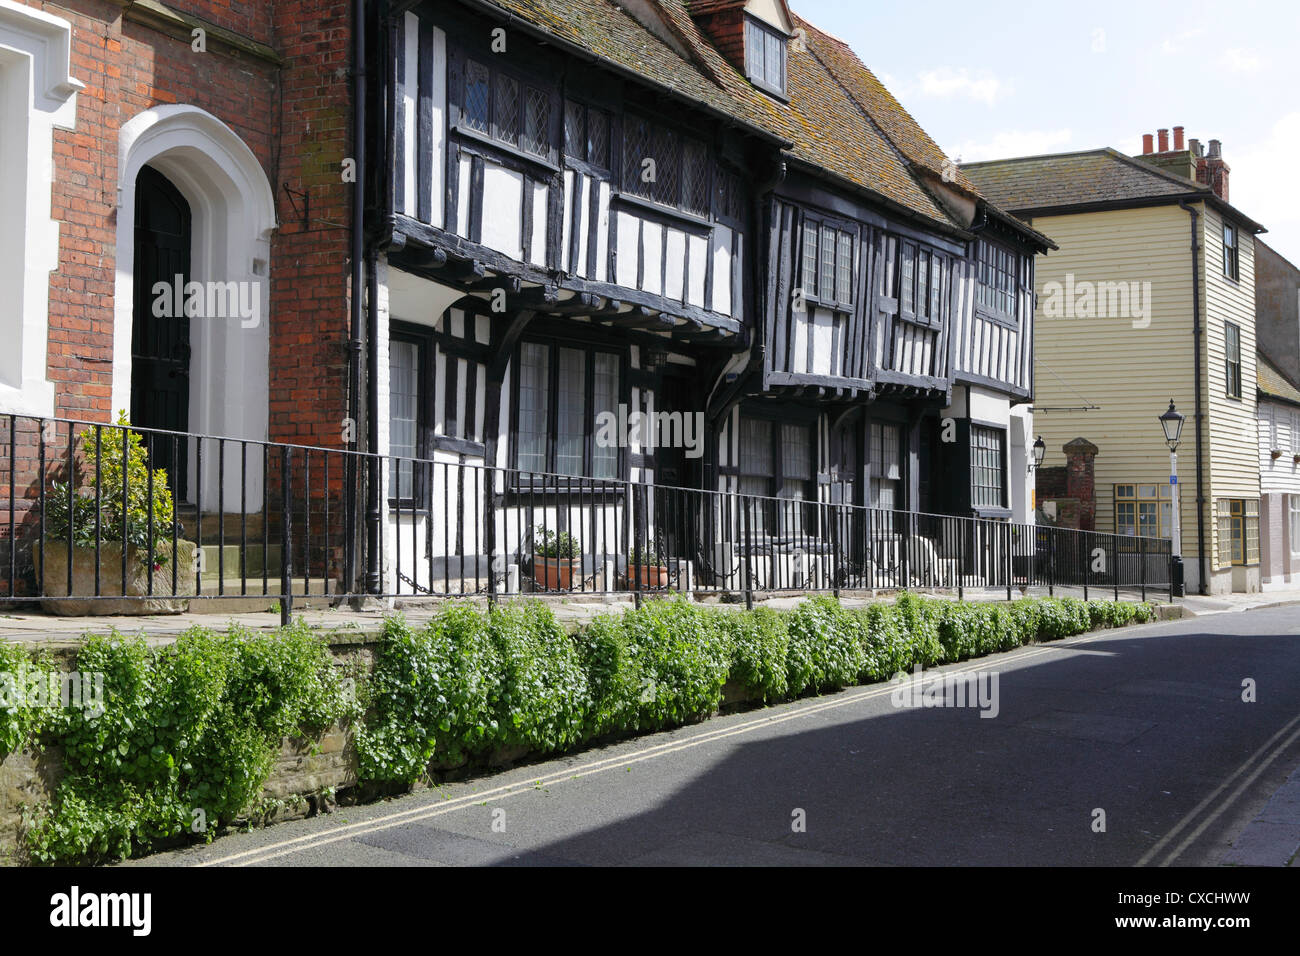 Half timbered medieval Sussex Wealden hall house in All Saints Street Hastings Old Town England UK GB Stock Photo